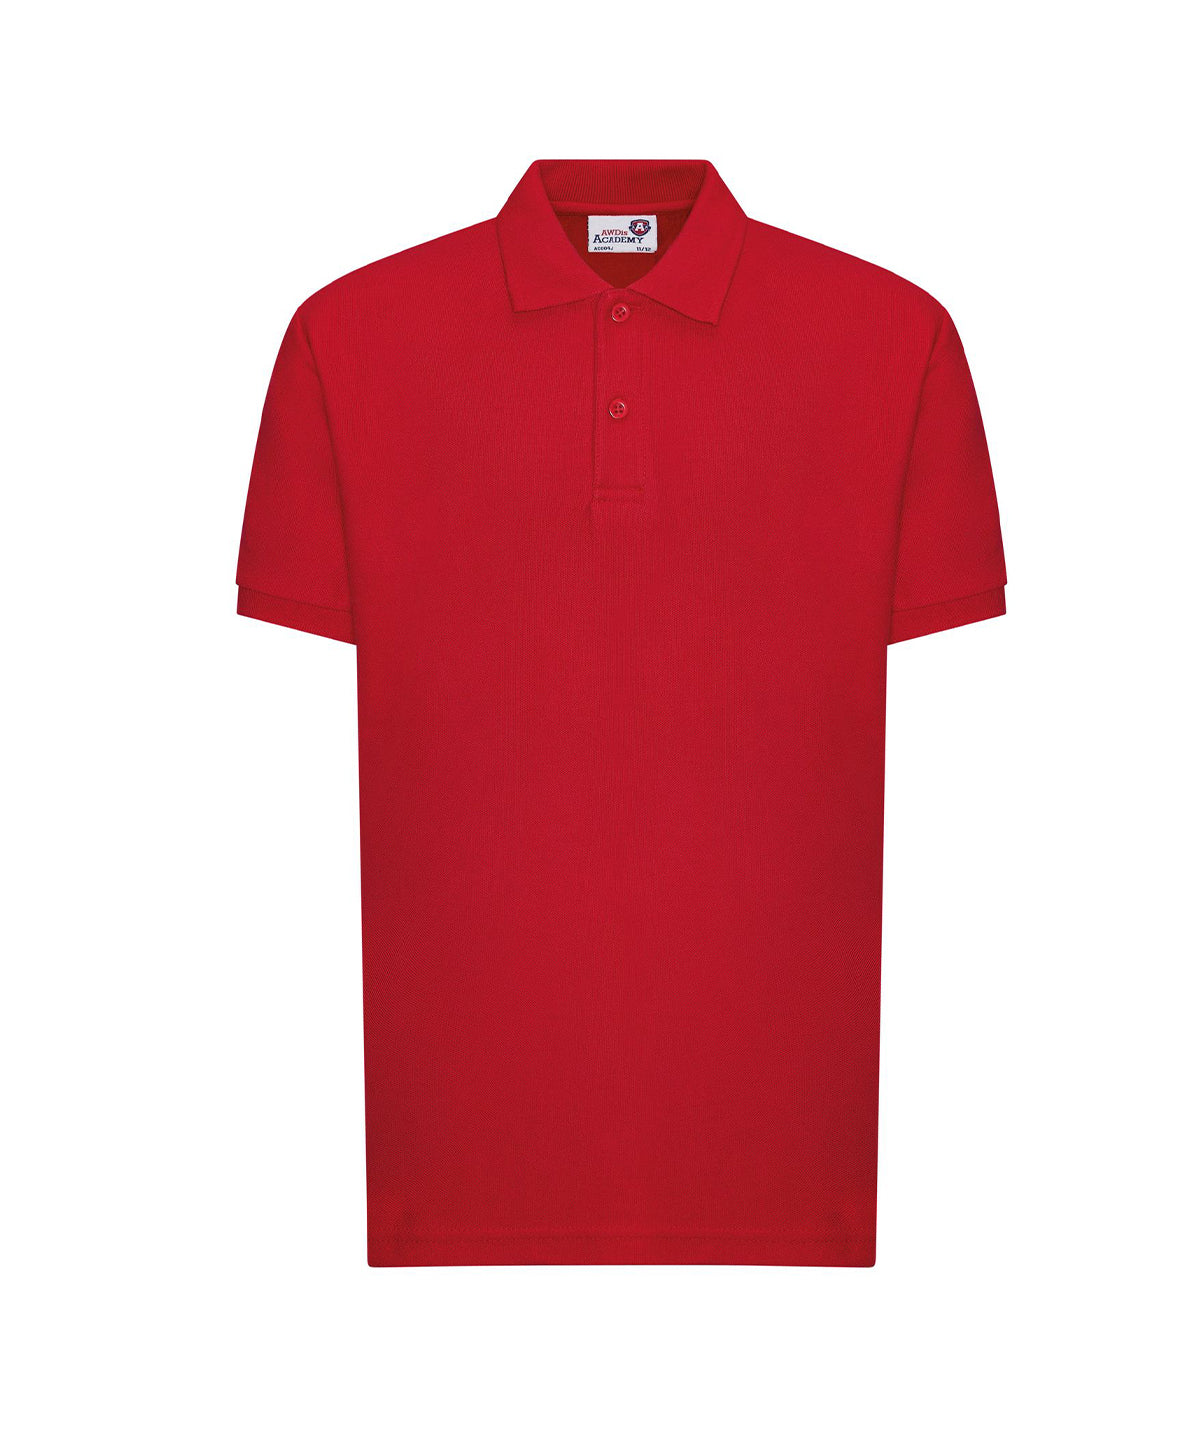 Personalised Polo Shirts - Mid Red AWDis Academy Kids Academy polo